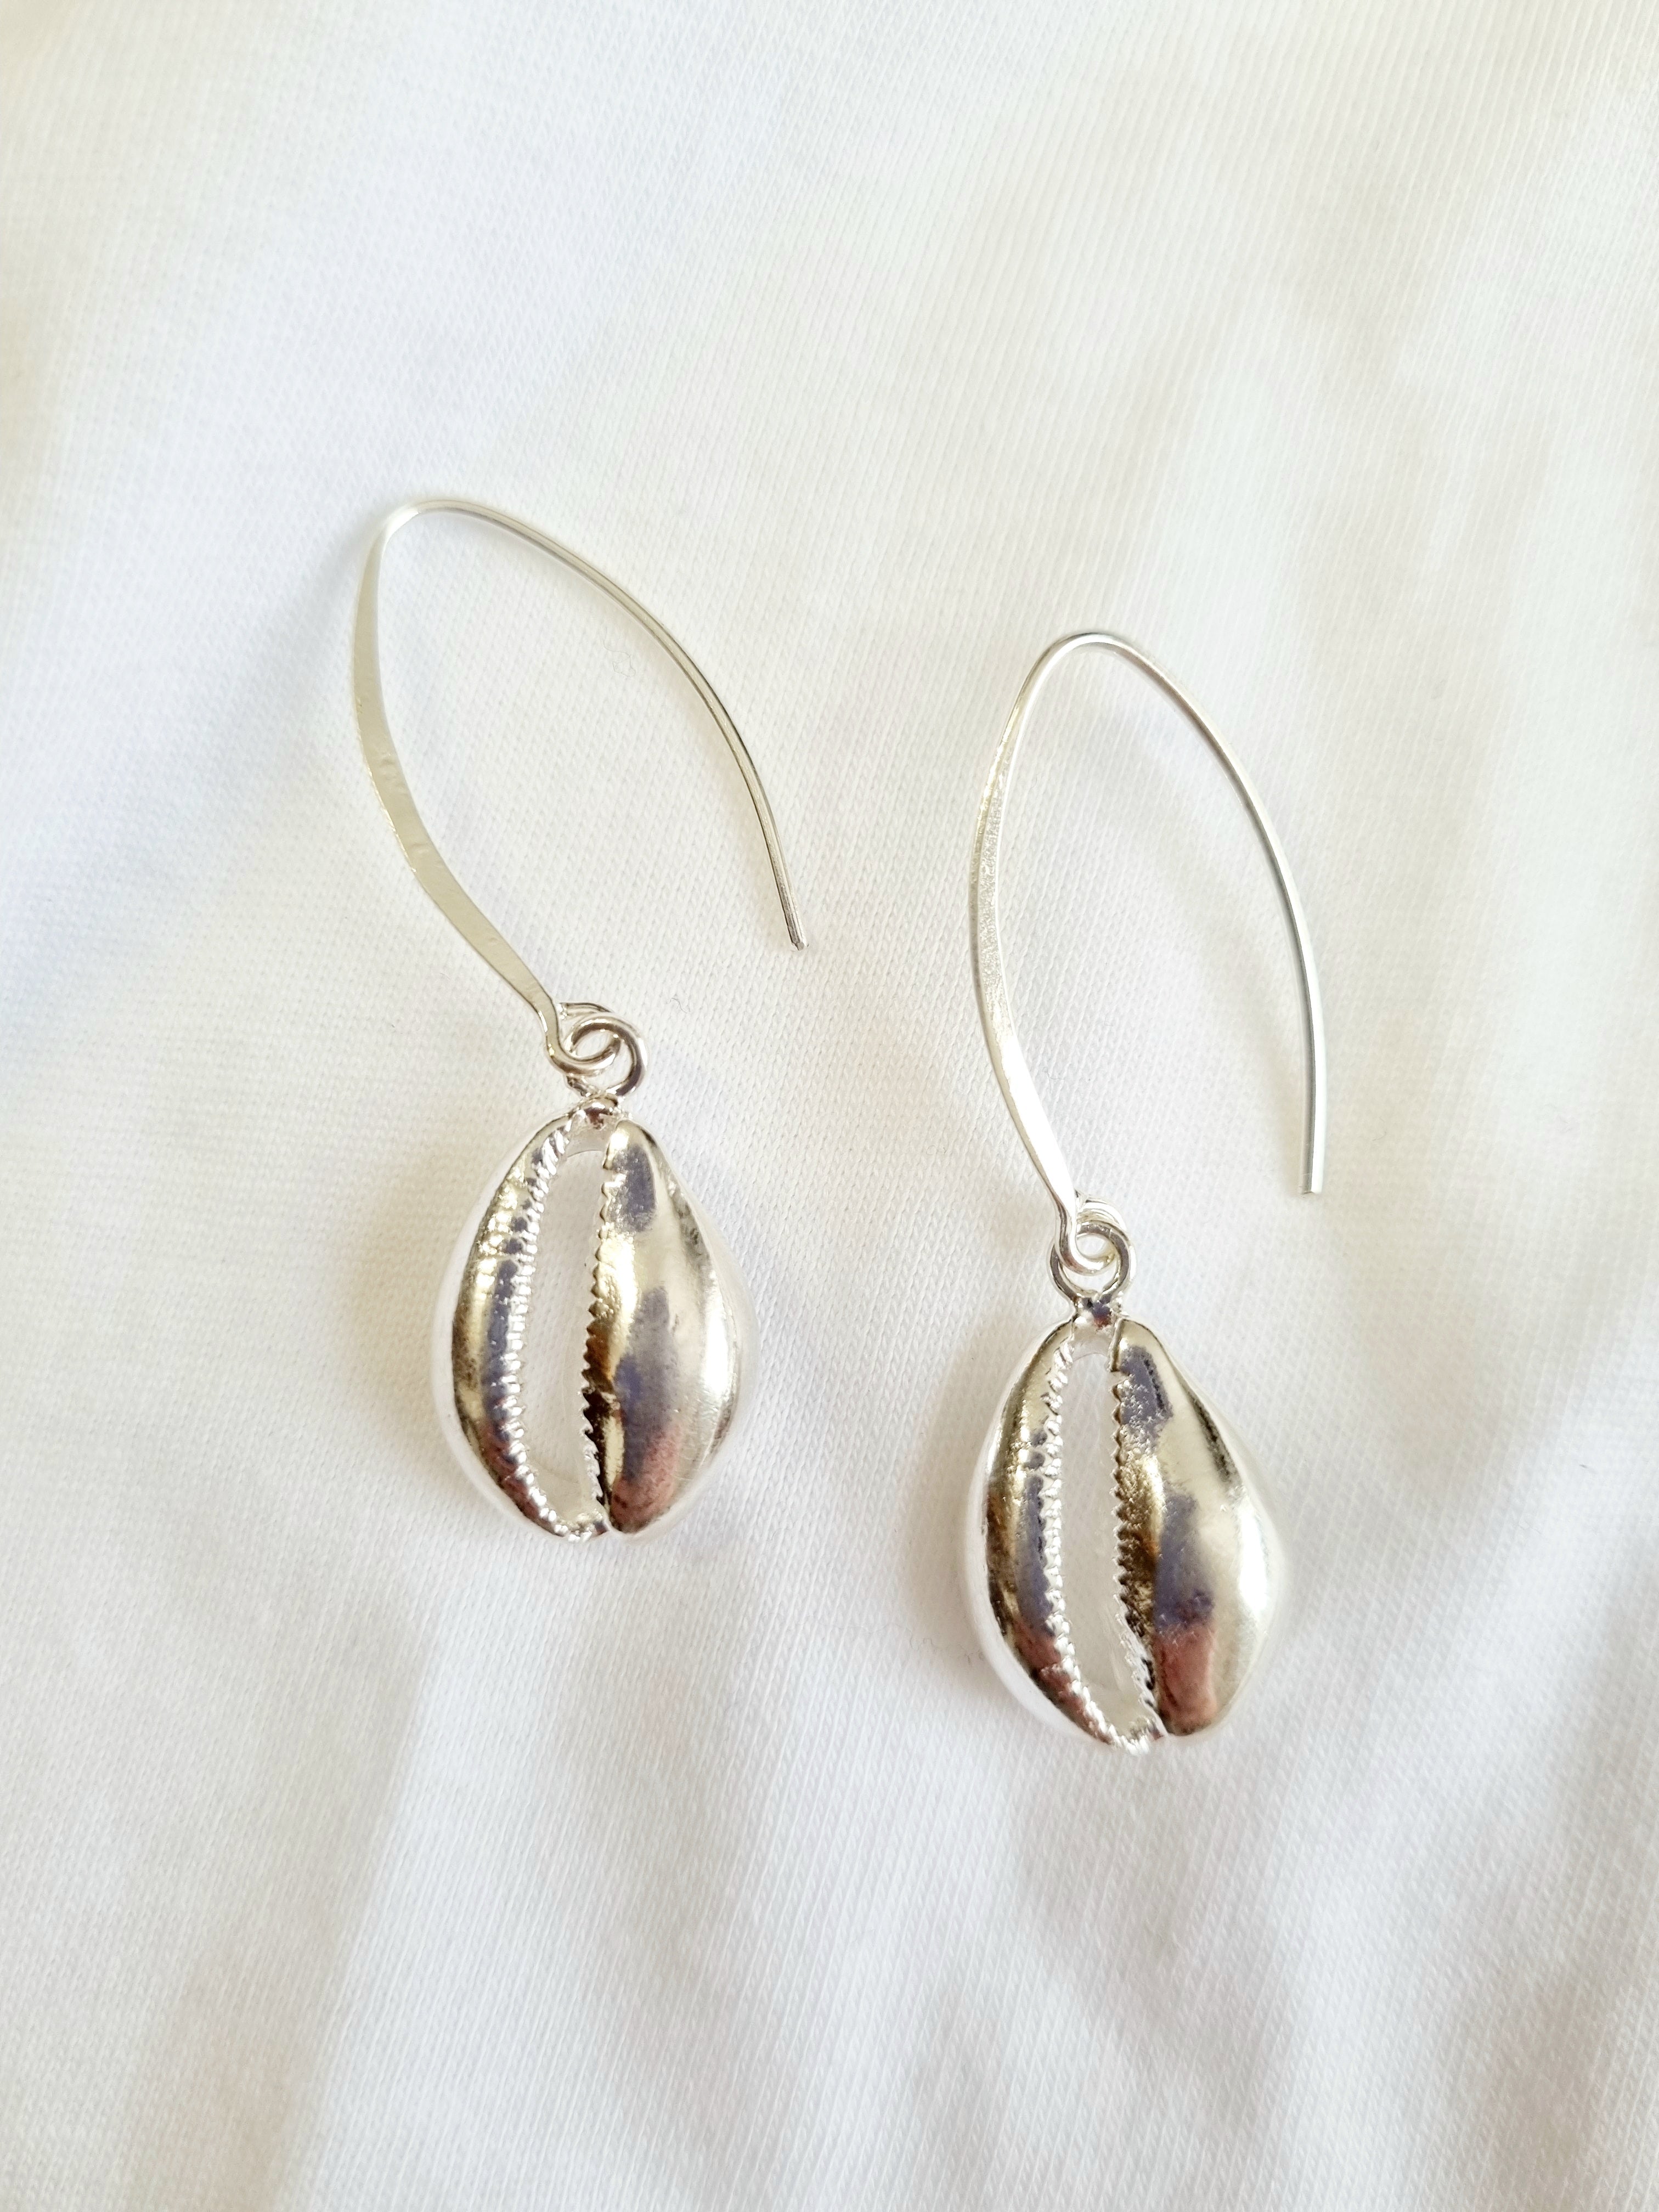 Tasmania Coastal Collection - Silver and Gold Earrings Earrings The rare and Beautiful Cowrie Earring Long (40mm) 